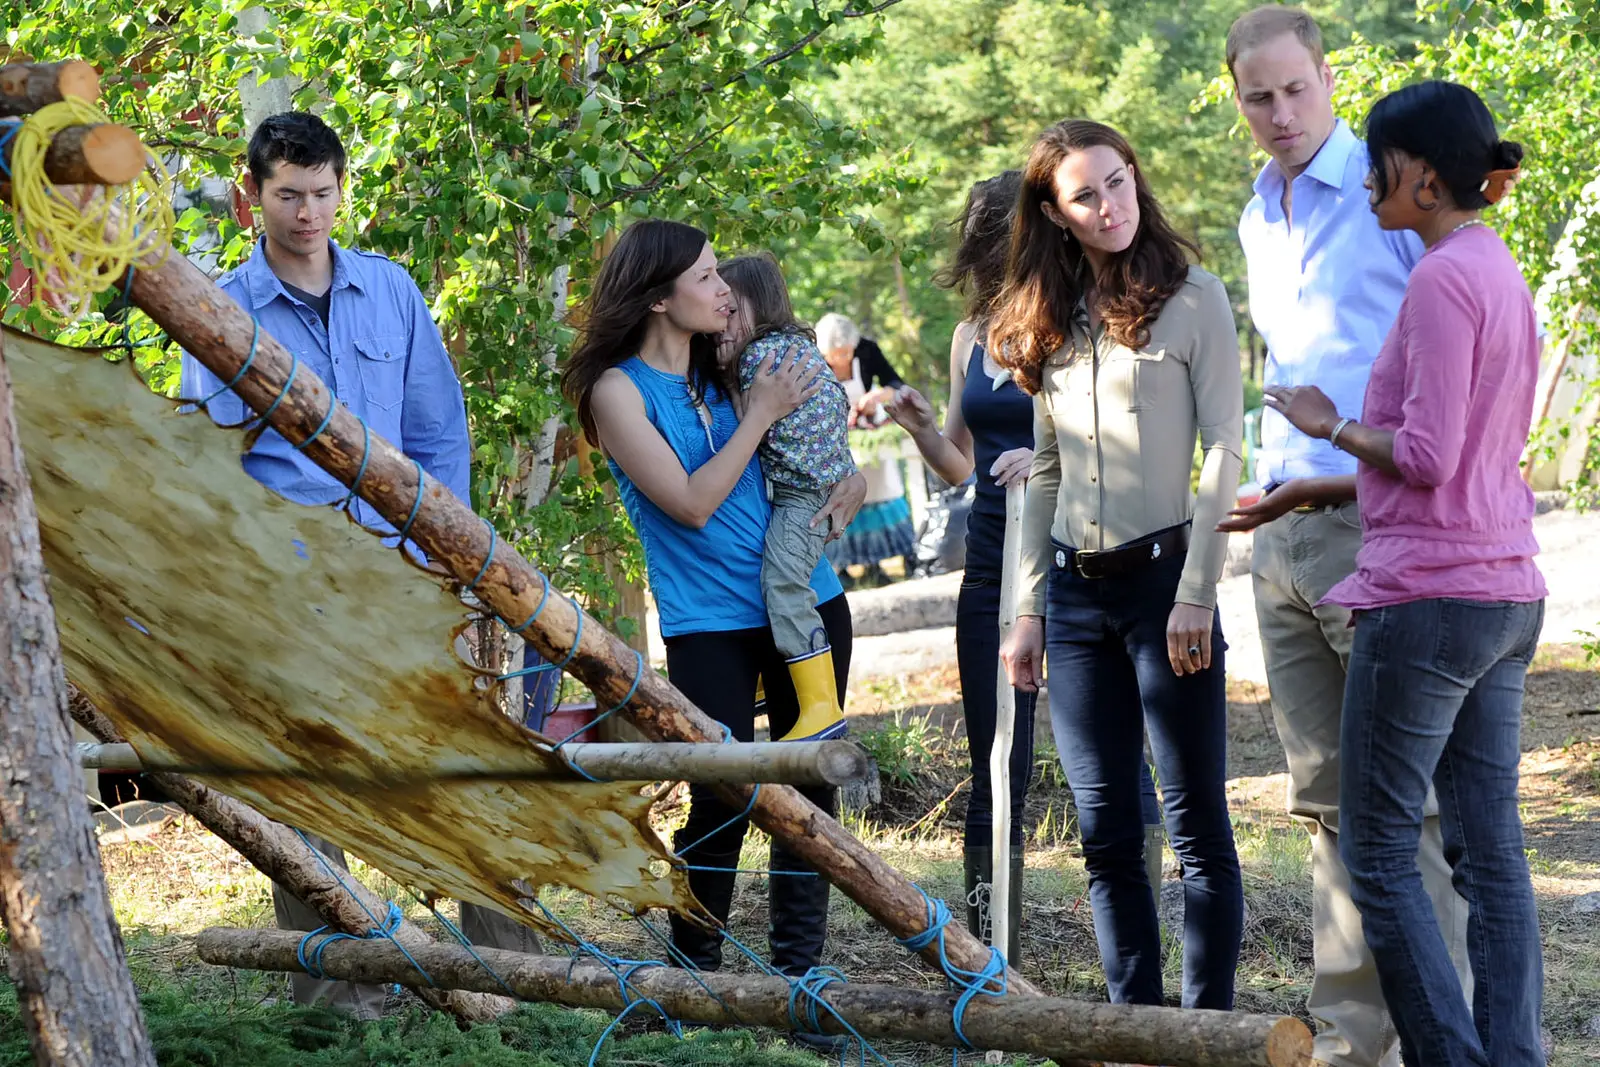 The Duke and Duchess of cambridge with university students during Canada visit in 2011